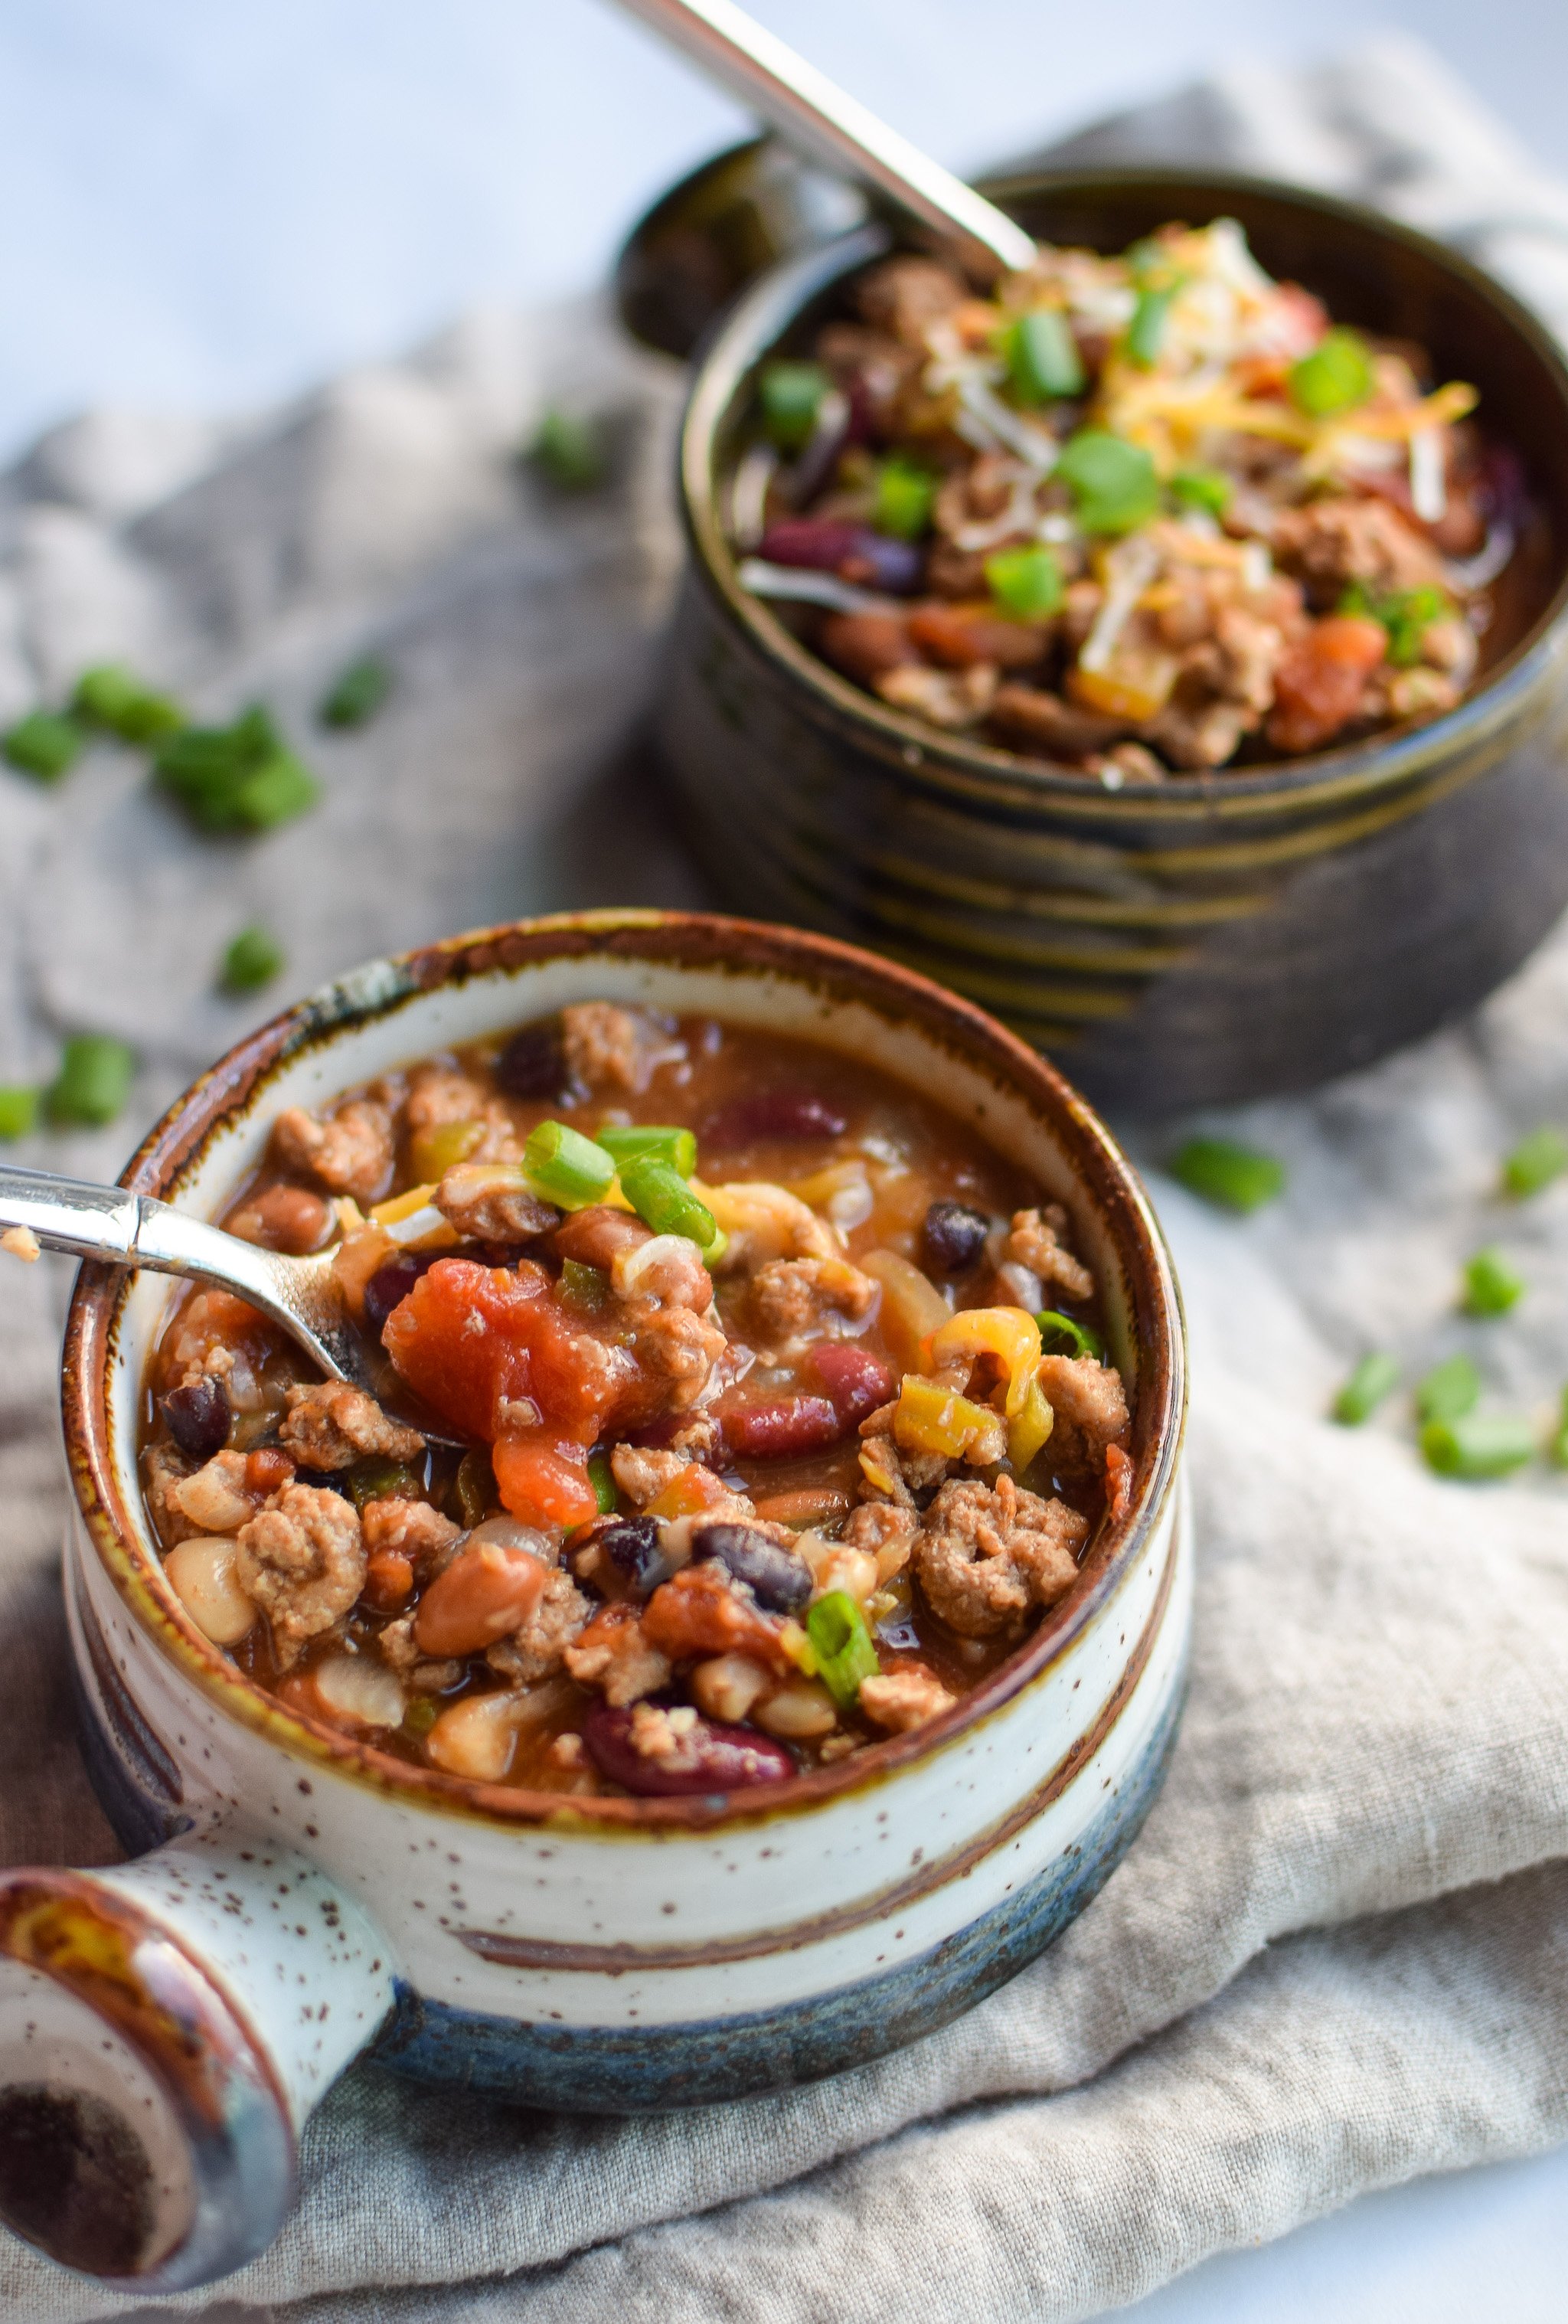 Easy Slow Cooker 4-Bean Turkey Chili recipe - A slow cooker classic that should be in everyone's cookbook! A hearty bean and turkey chili with some smokey kick! - ProjectMealPlan.com